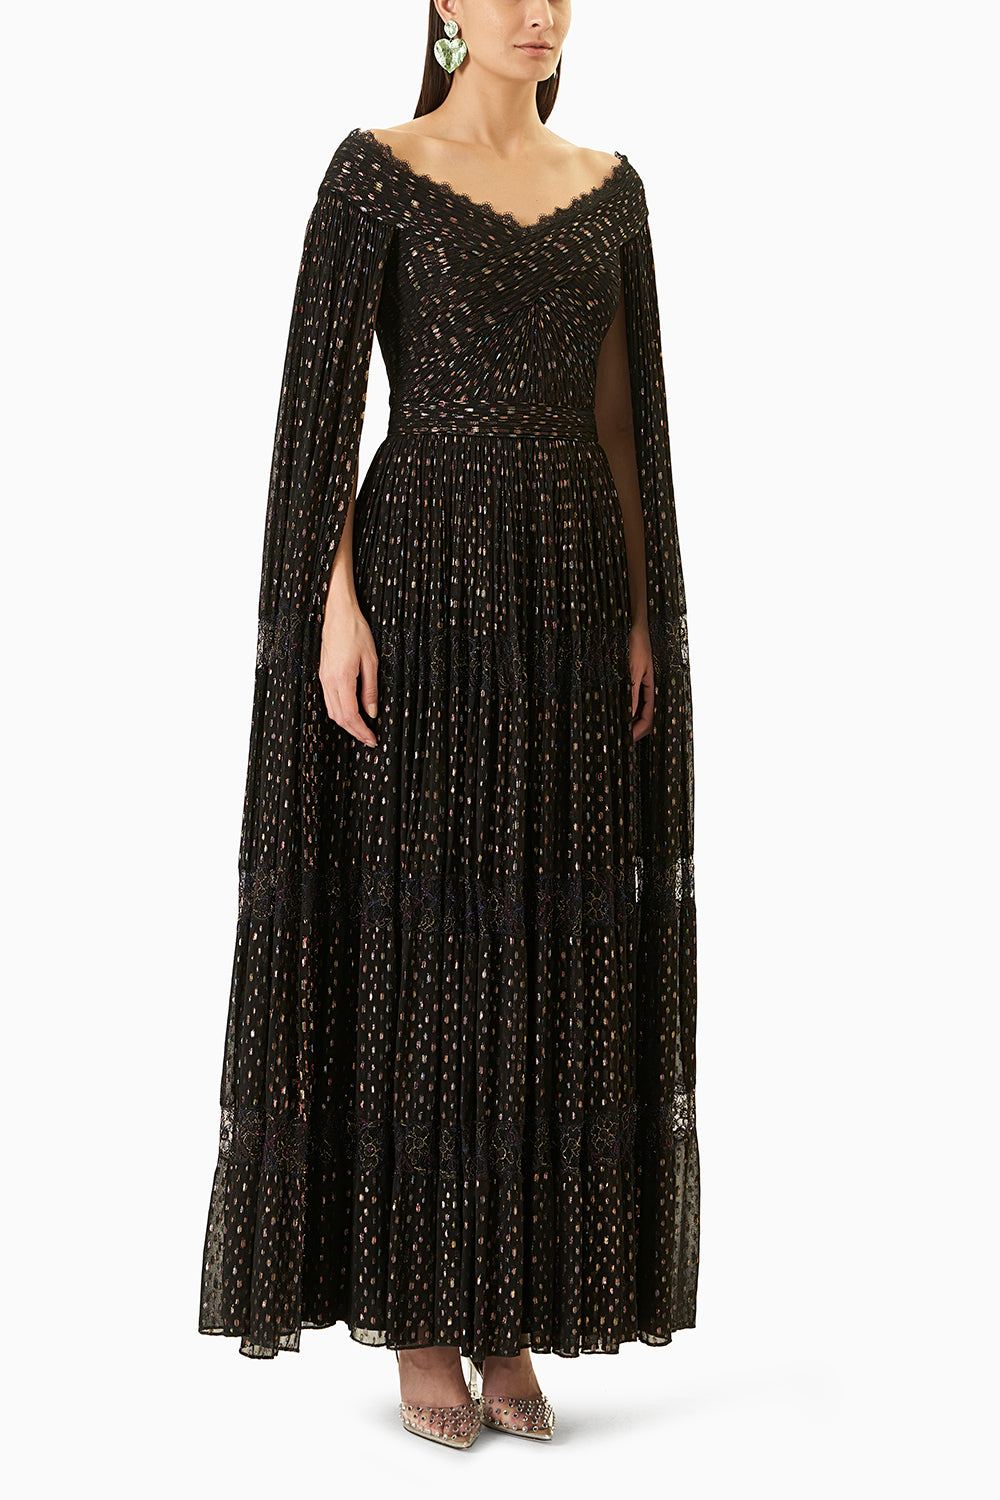 Black Lurex Long Dress With Cape Sleeves